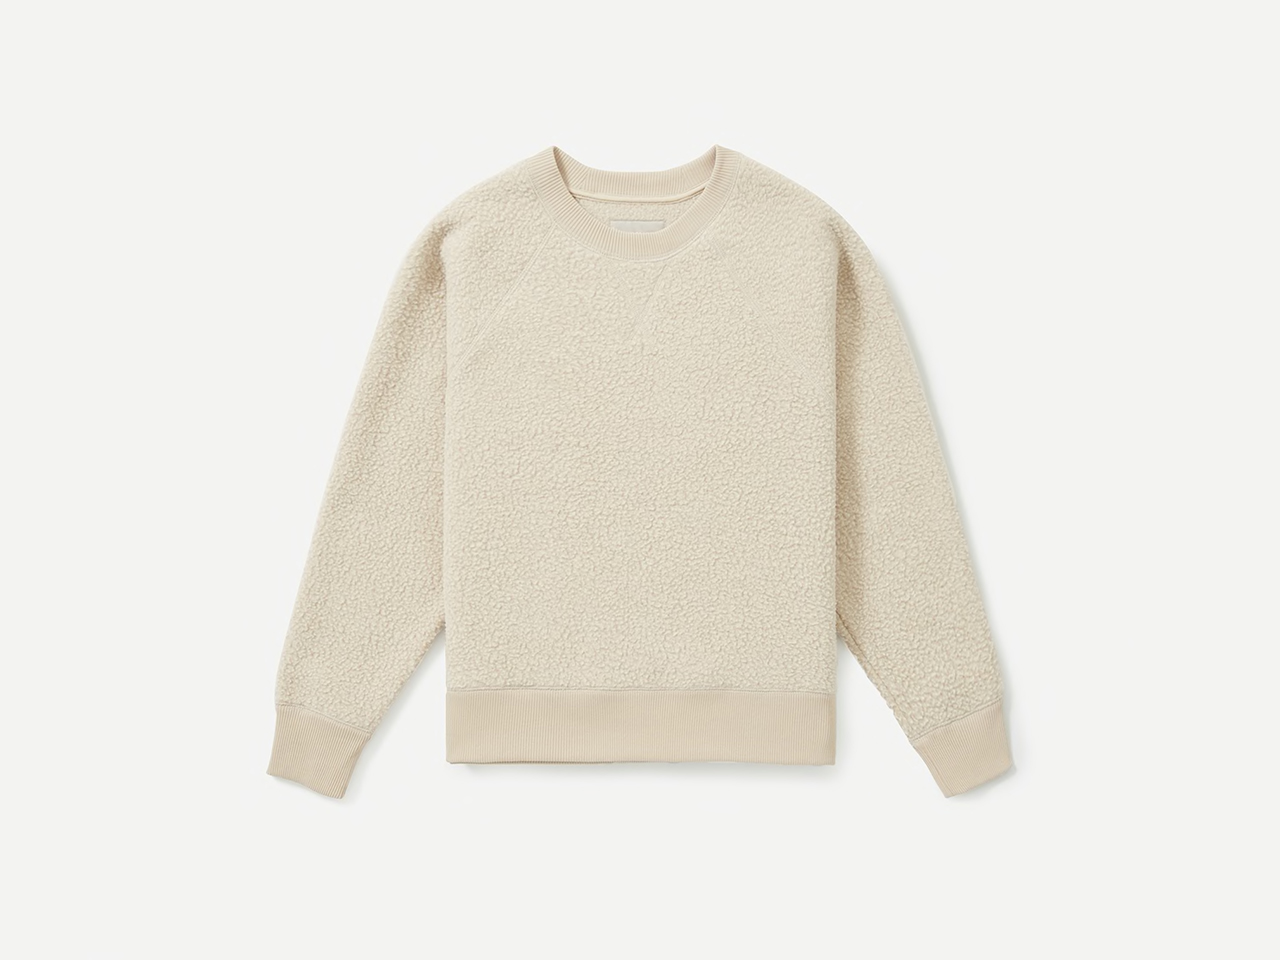 A cream fleece sweater made from recycled polyester on a light background.